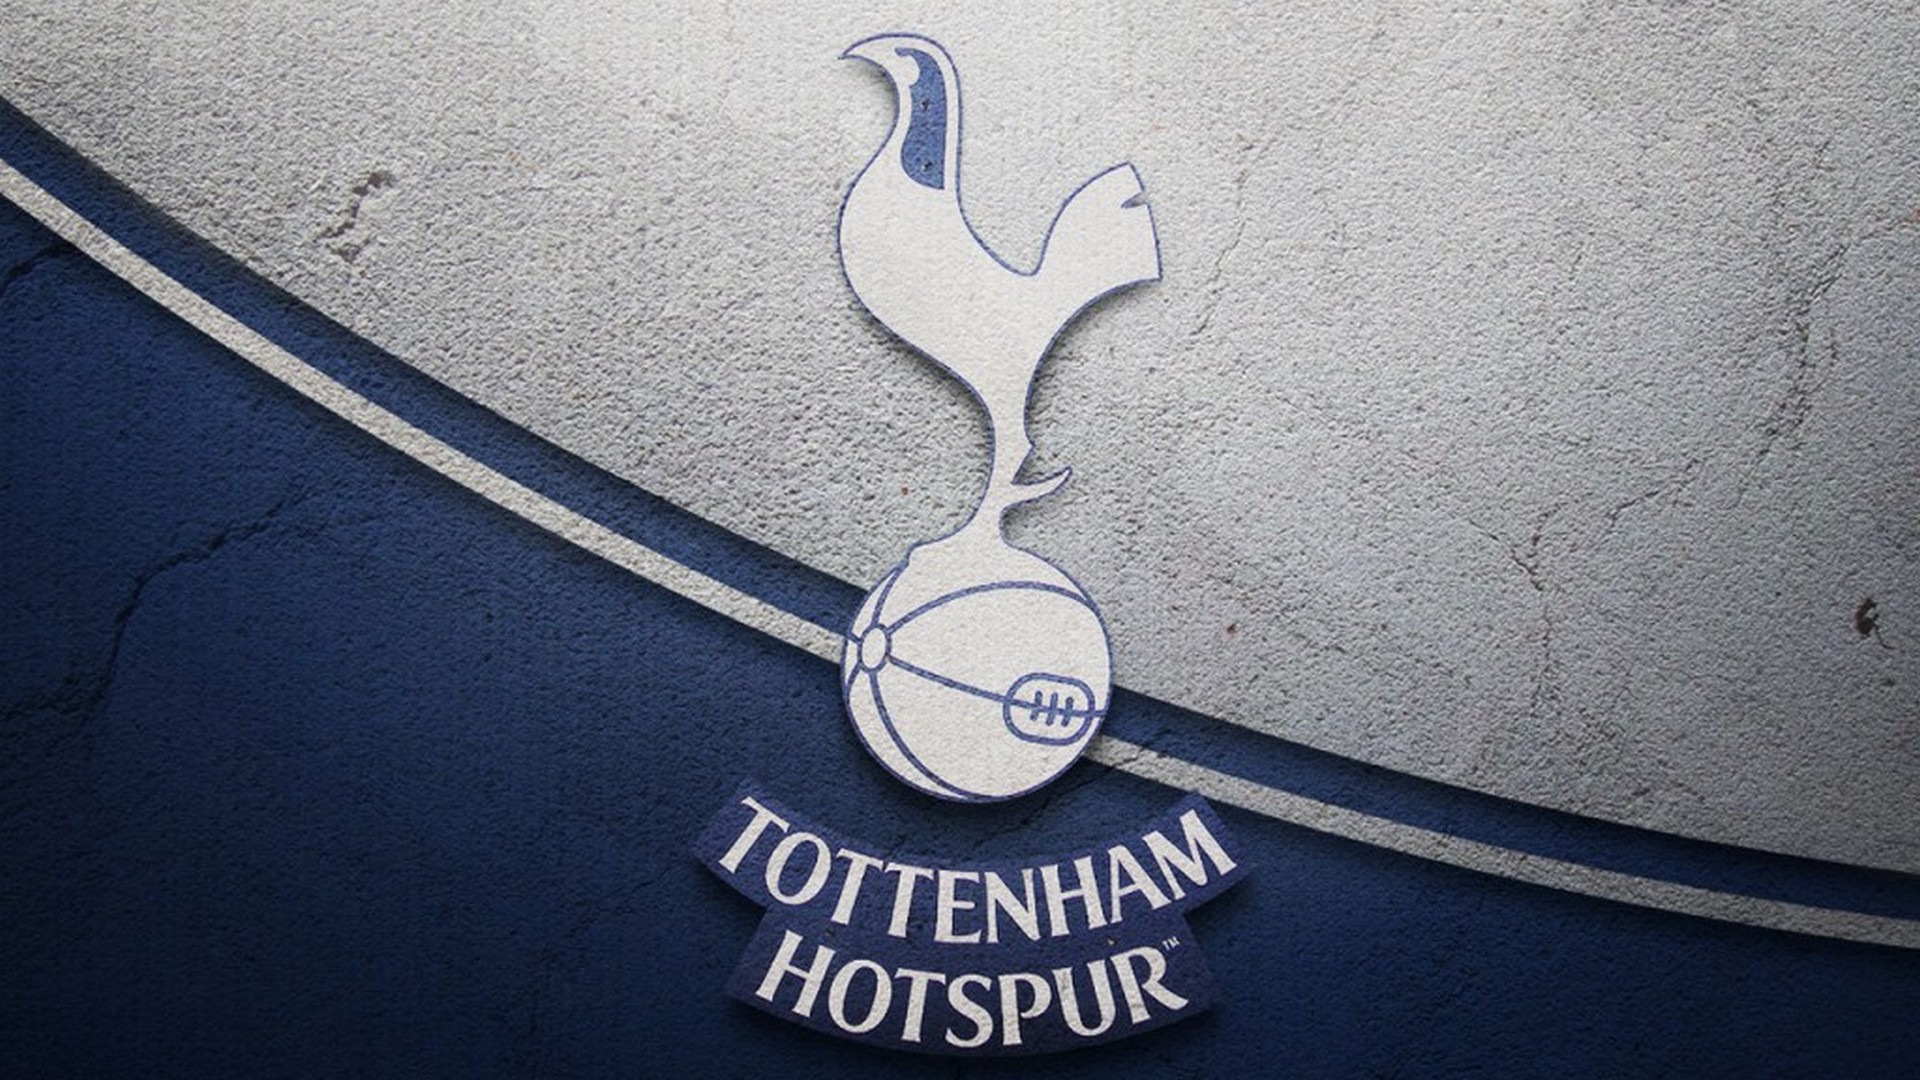 Tottenham Hotspur For Mac Wallpaper with high-resolution 1920x1080 pixel. You can use this wallpaper for your Desktop Computers, Mac Screensavers, Windows Backgrounds, iPhone Wallpapers, Tablet or Android Lock screen and another Mobile device